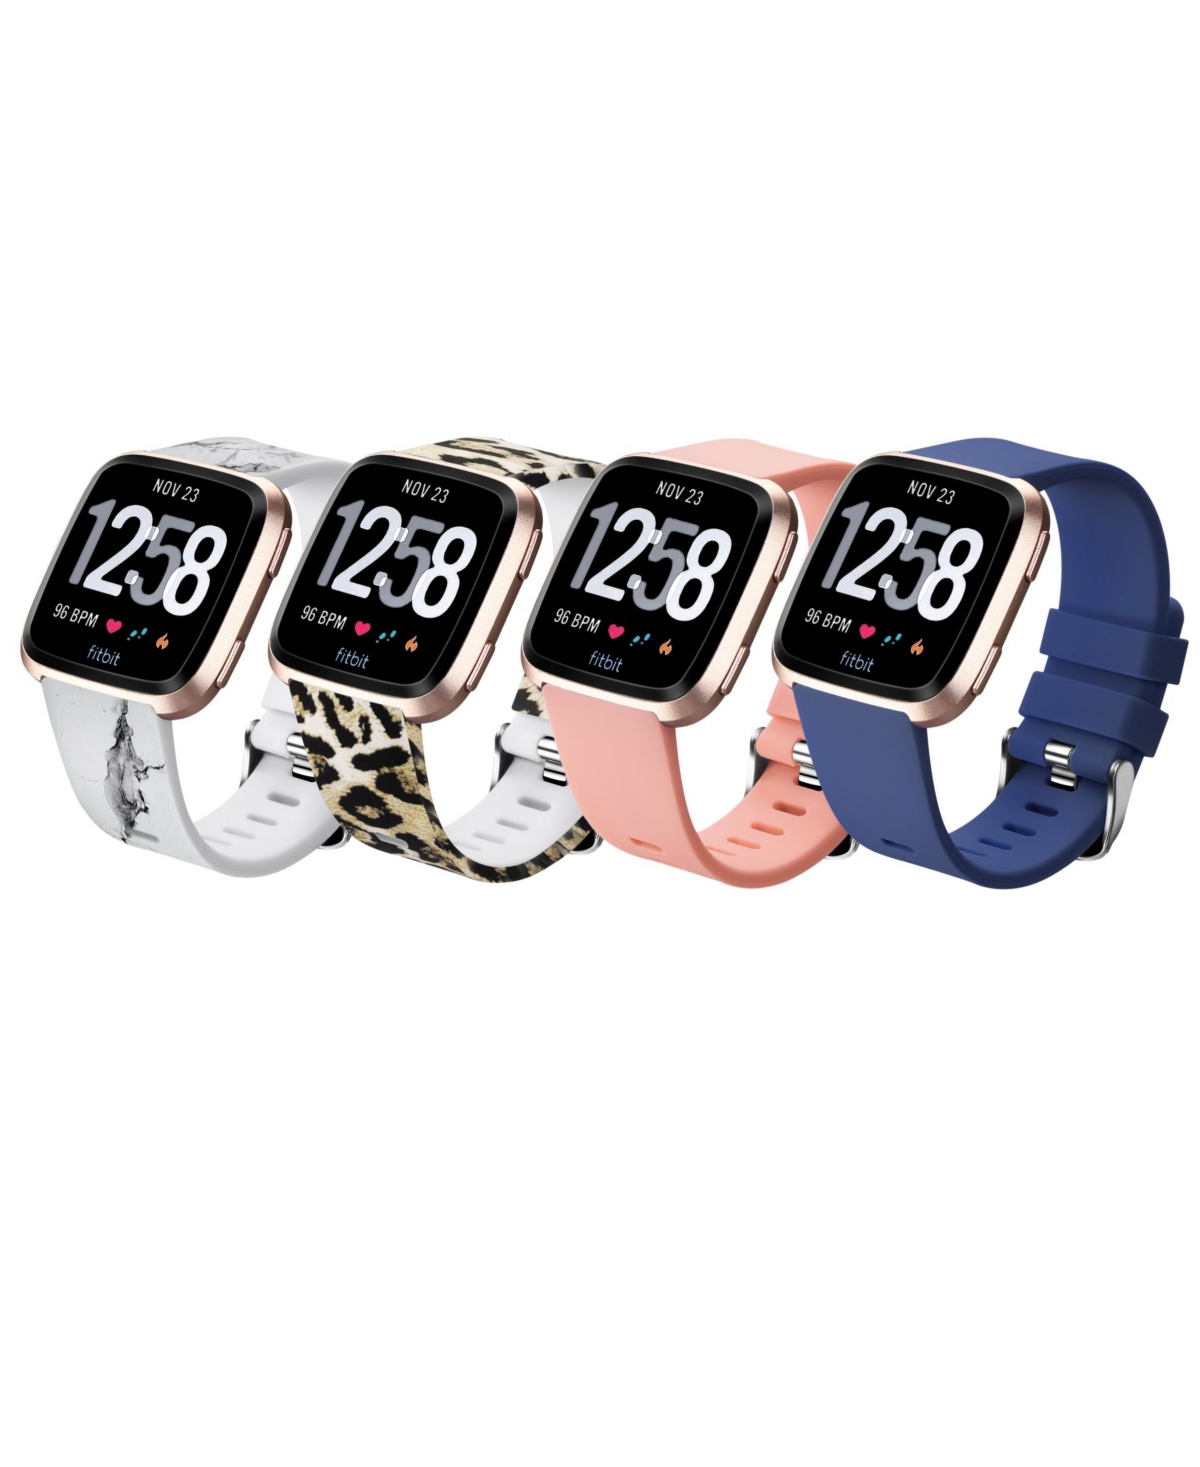 Unisex Fitbit Versa Assorted Silicone Watch Replacement Bands - Pack of 4 - Multi